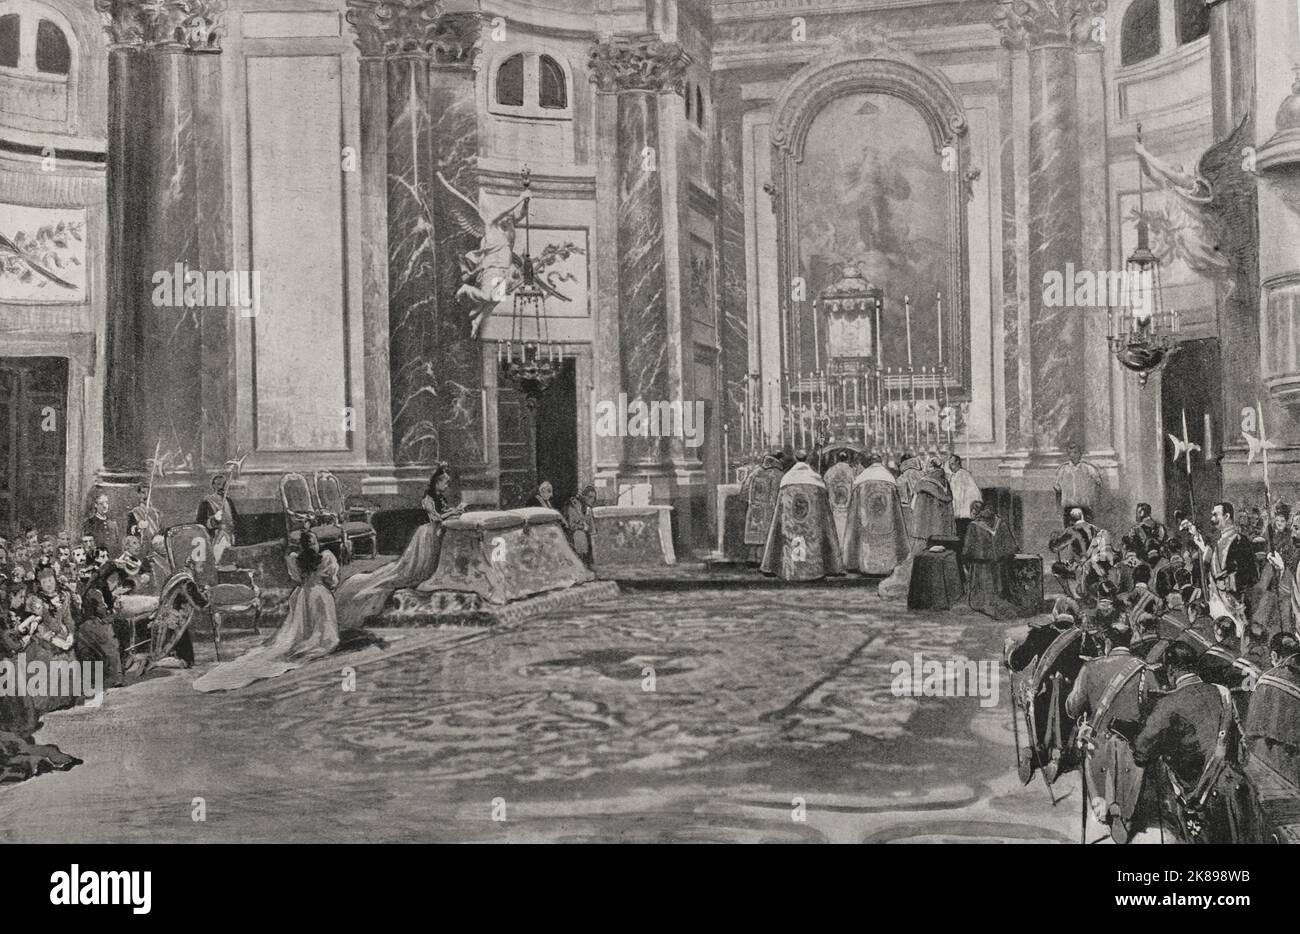 Te Deum held on 24 January 1898 in the chapel of the Royal Palace, thanksgiving for the pacification of the Philippines. Stock Photo